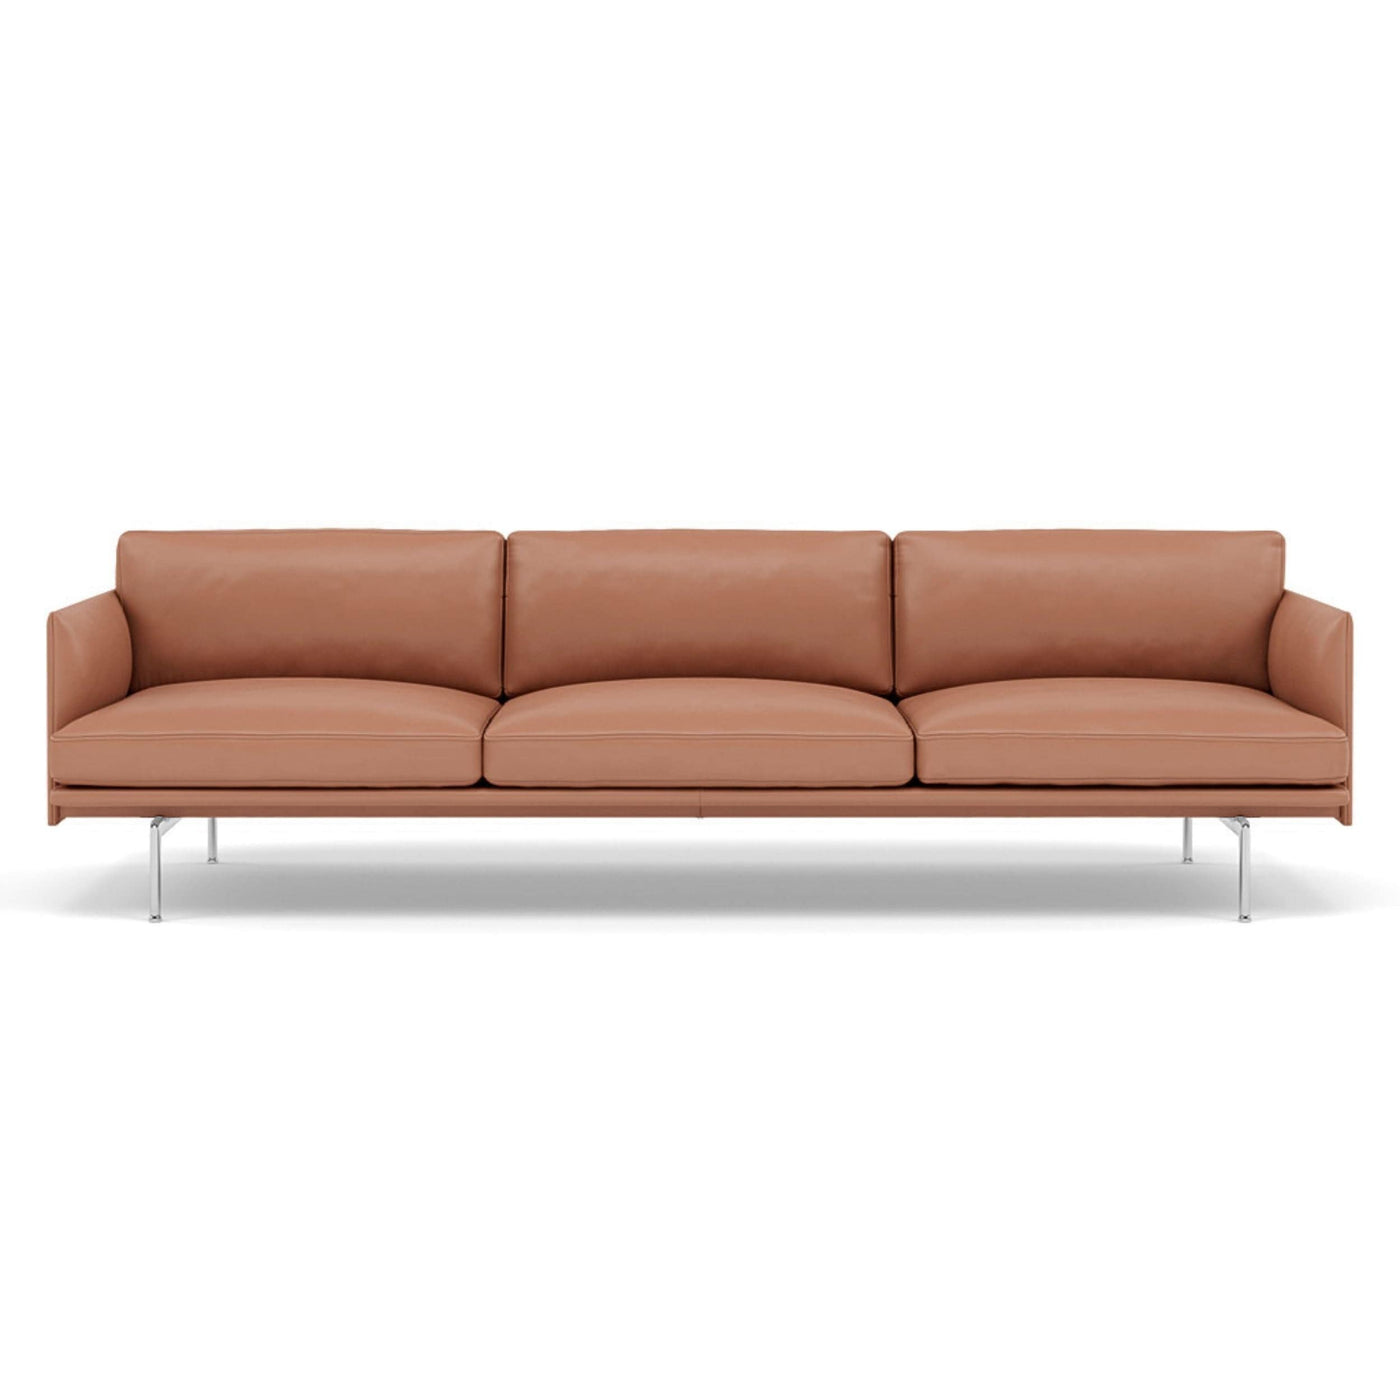 muuto outline 3.5 seater sofa in cognac refine leather and polished aluminium legs. Made to order from someday designs. #colour_cognac-refine-leather